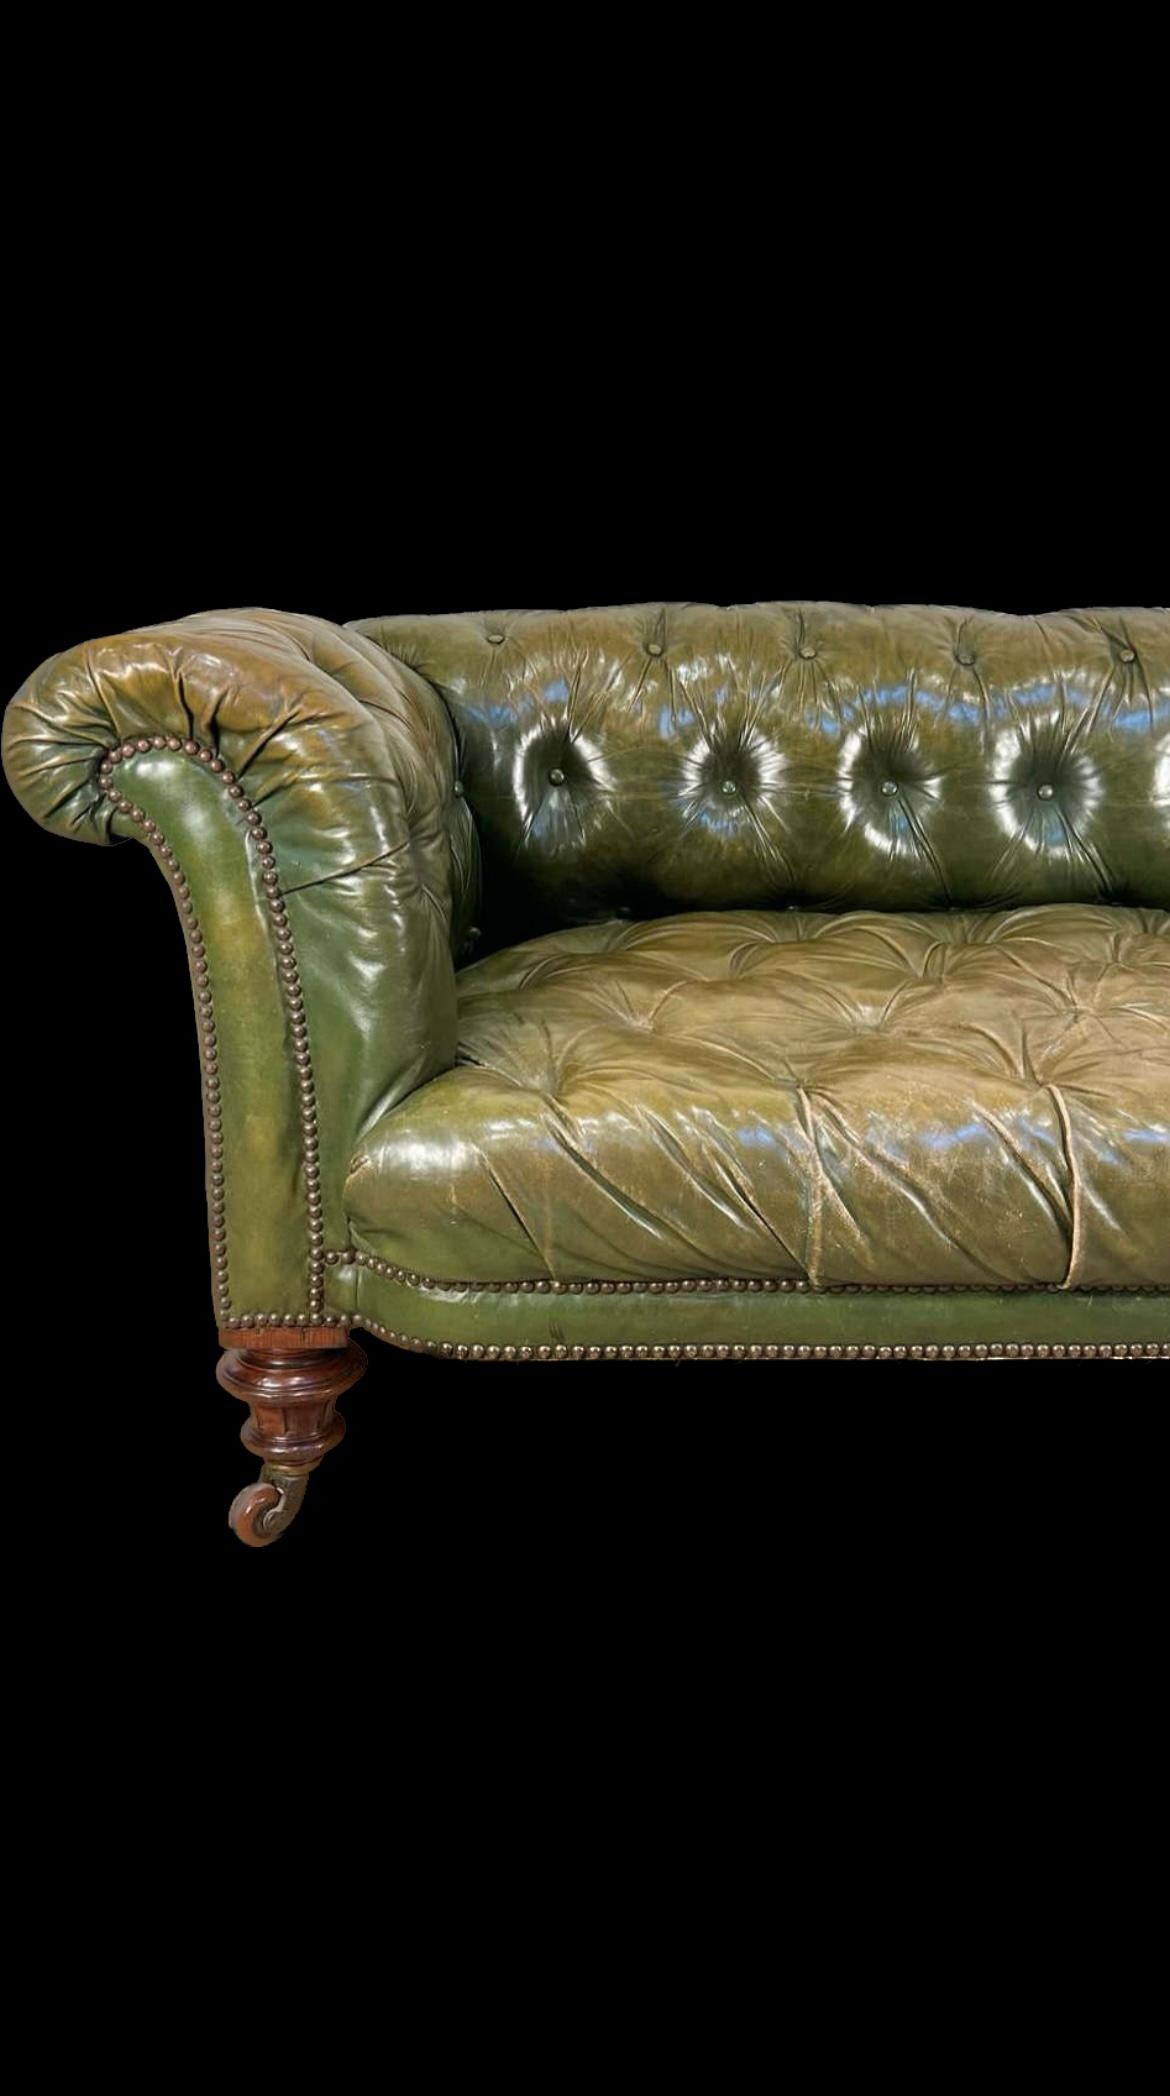 British Early 19thC William IV Chesterfield Sofa in Beautiful Green Leathers For Sale